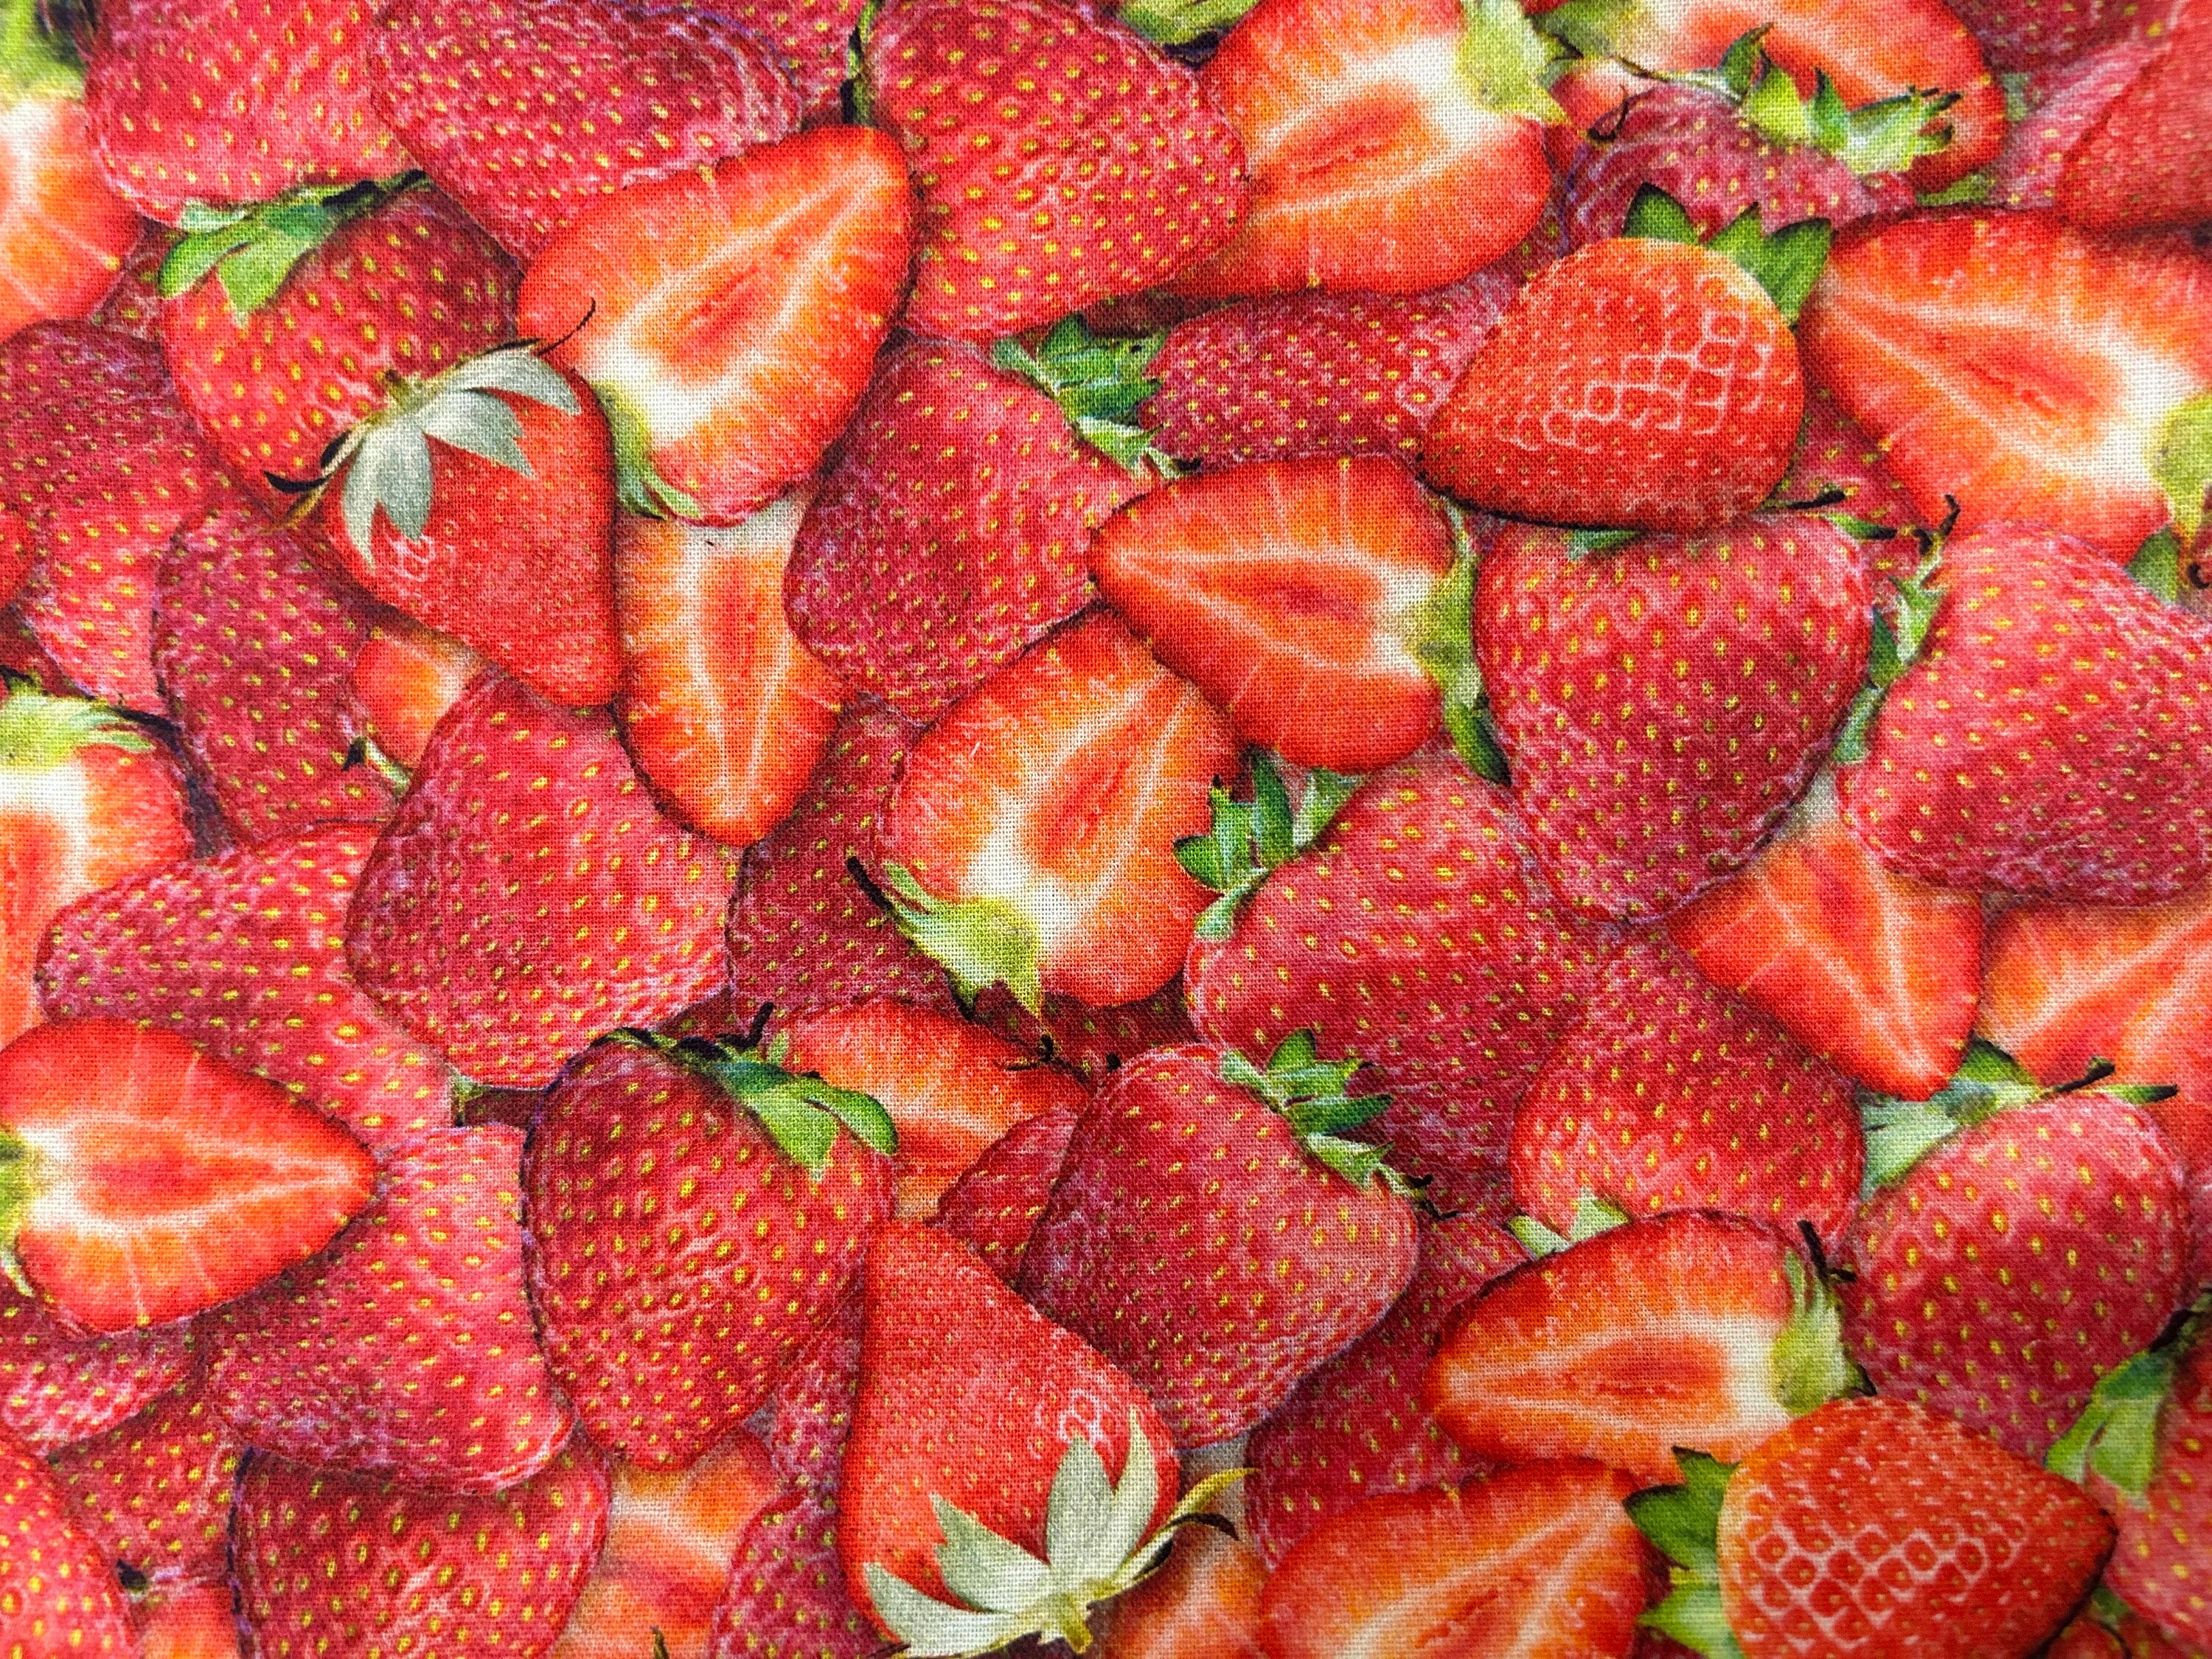 Strawberry Garden Collection Packed Strawberries Cotton Fabric 506-86